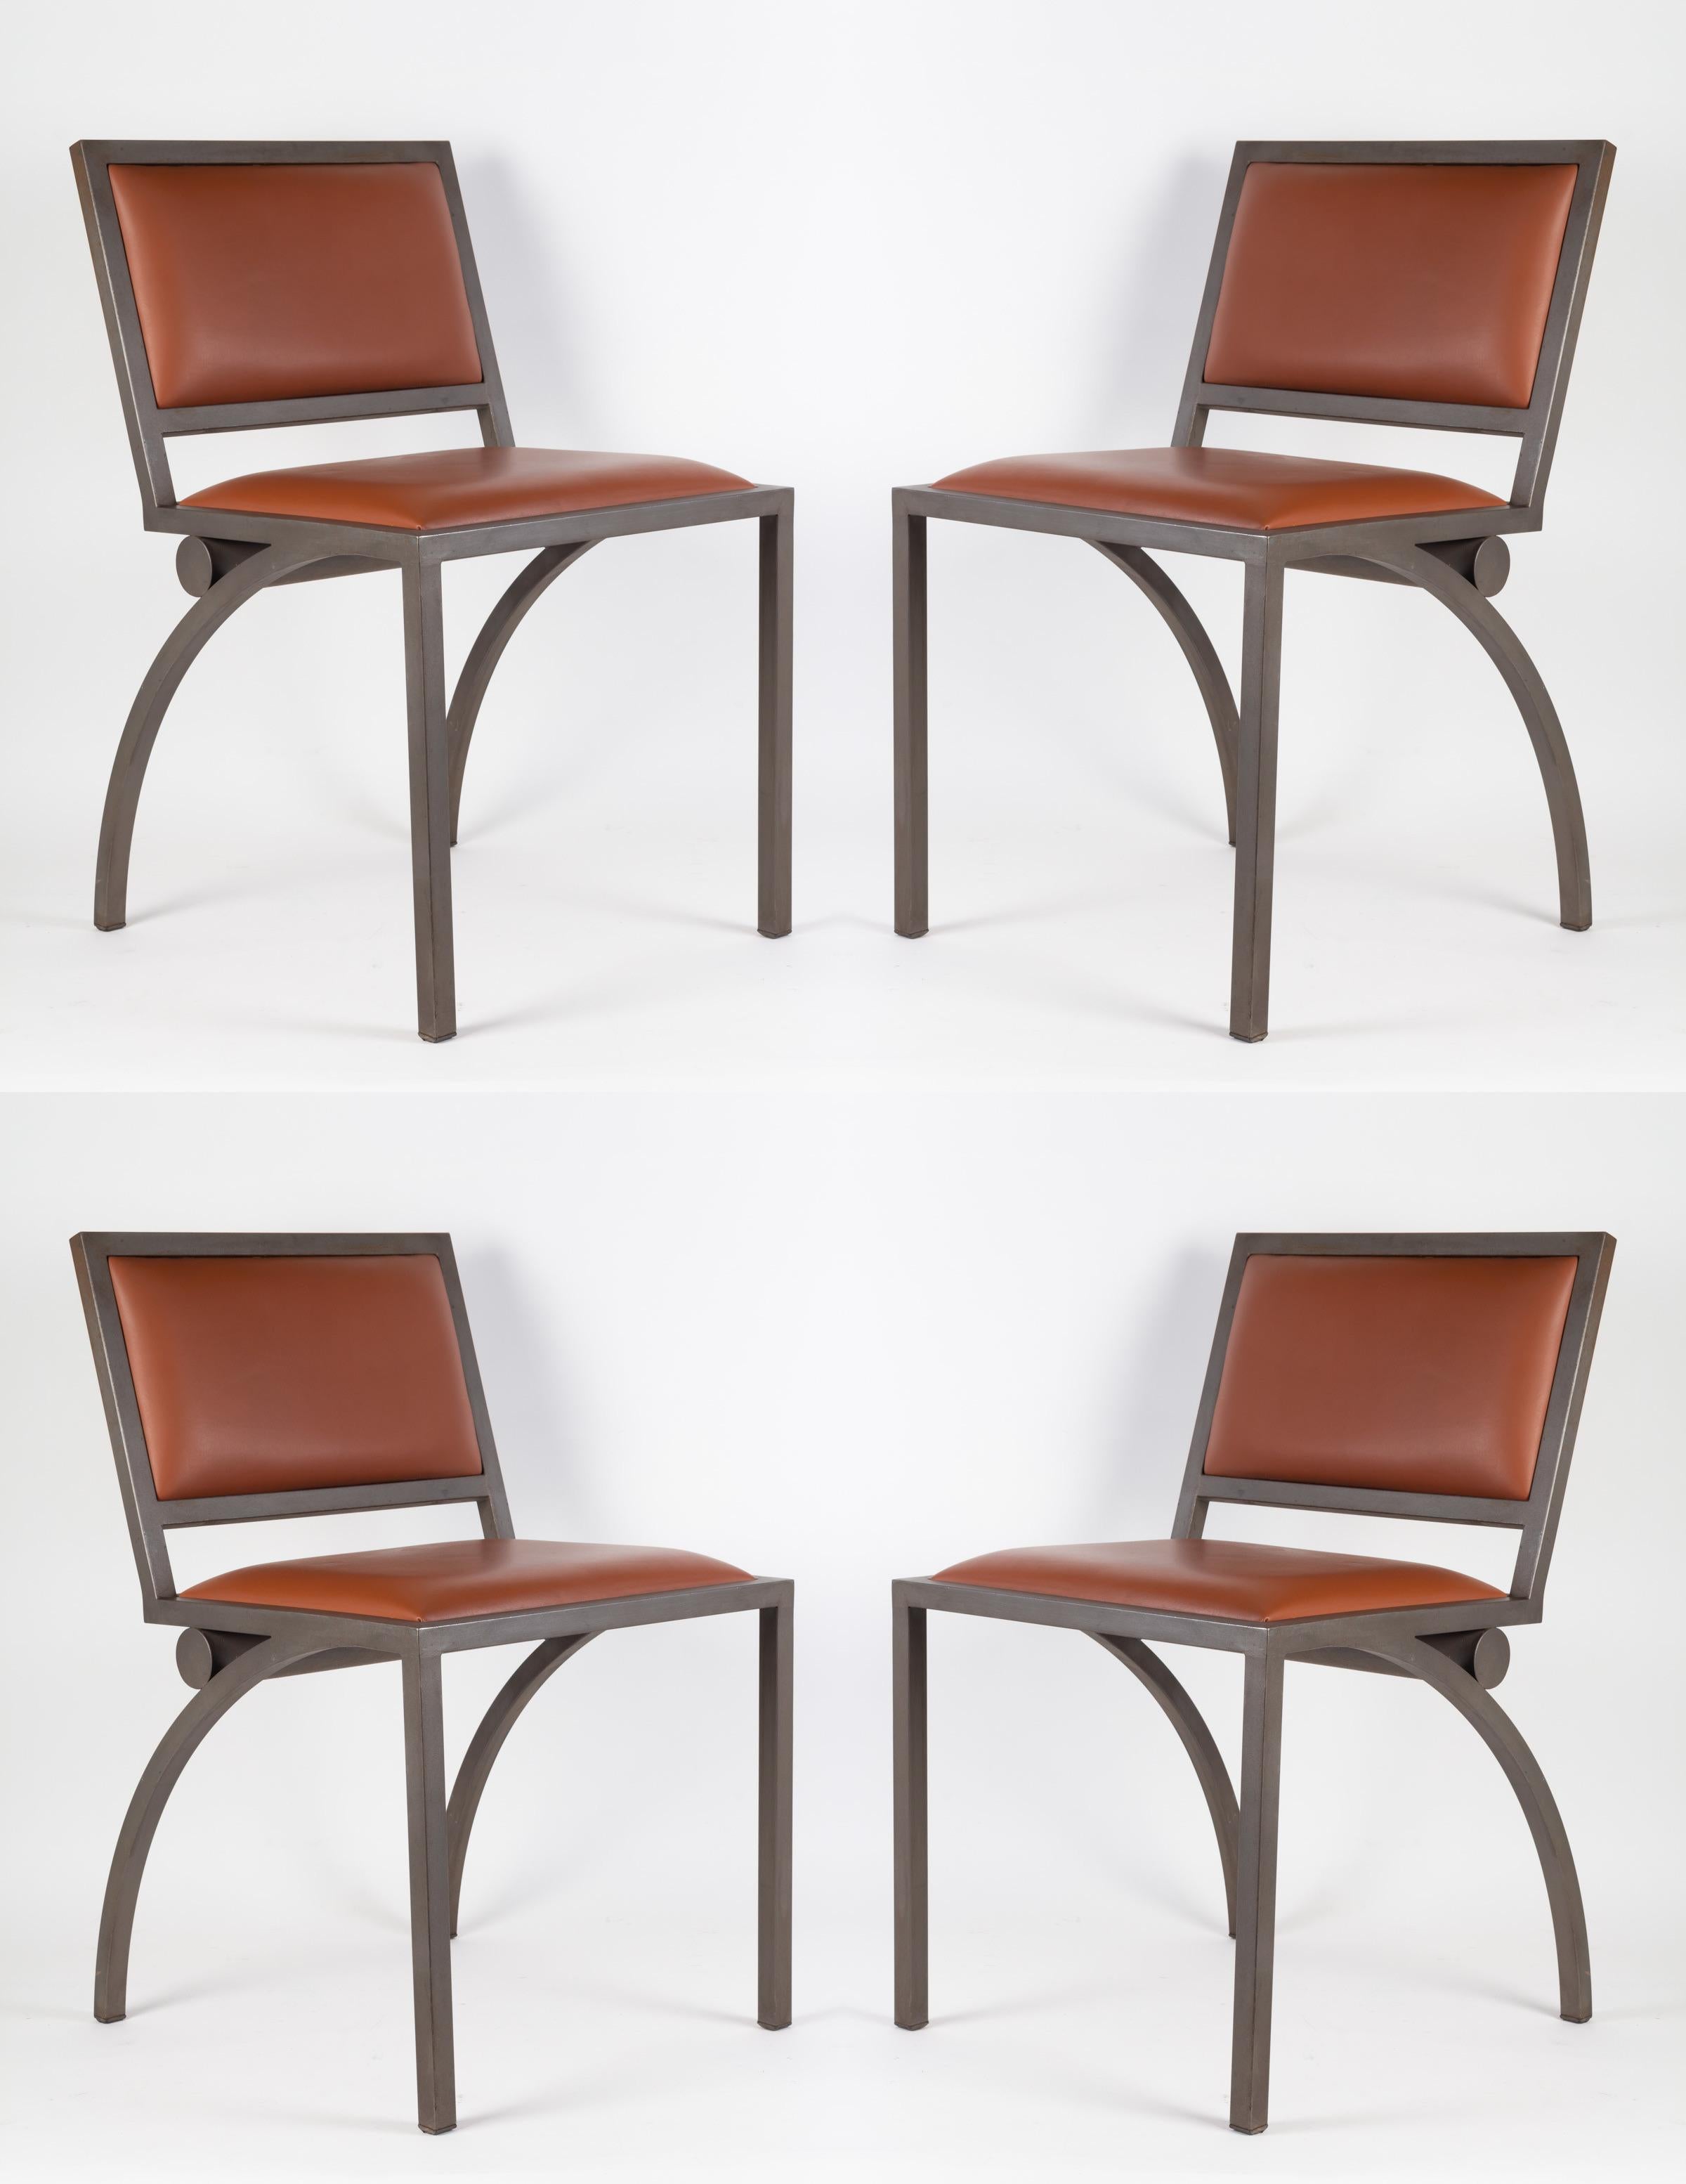 Jean-Michelle Wilmotte, 1956-1989, 2 armchairs and 4 chairs models cylinder, sandblasted metal and stitched leather saddler, models similar to the national furniture collection
Measures: Chairs: W 65cm, L 47cm, H 78cm
Armchairs: W 66cm, L 64cm, H